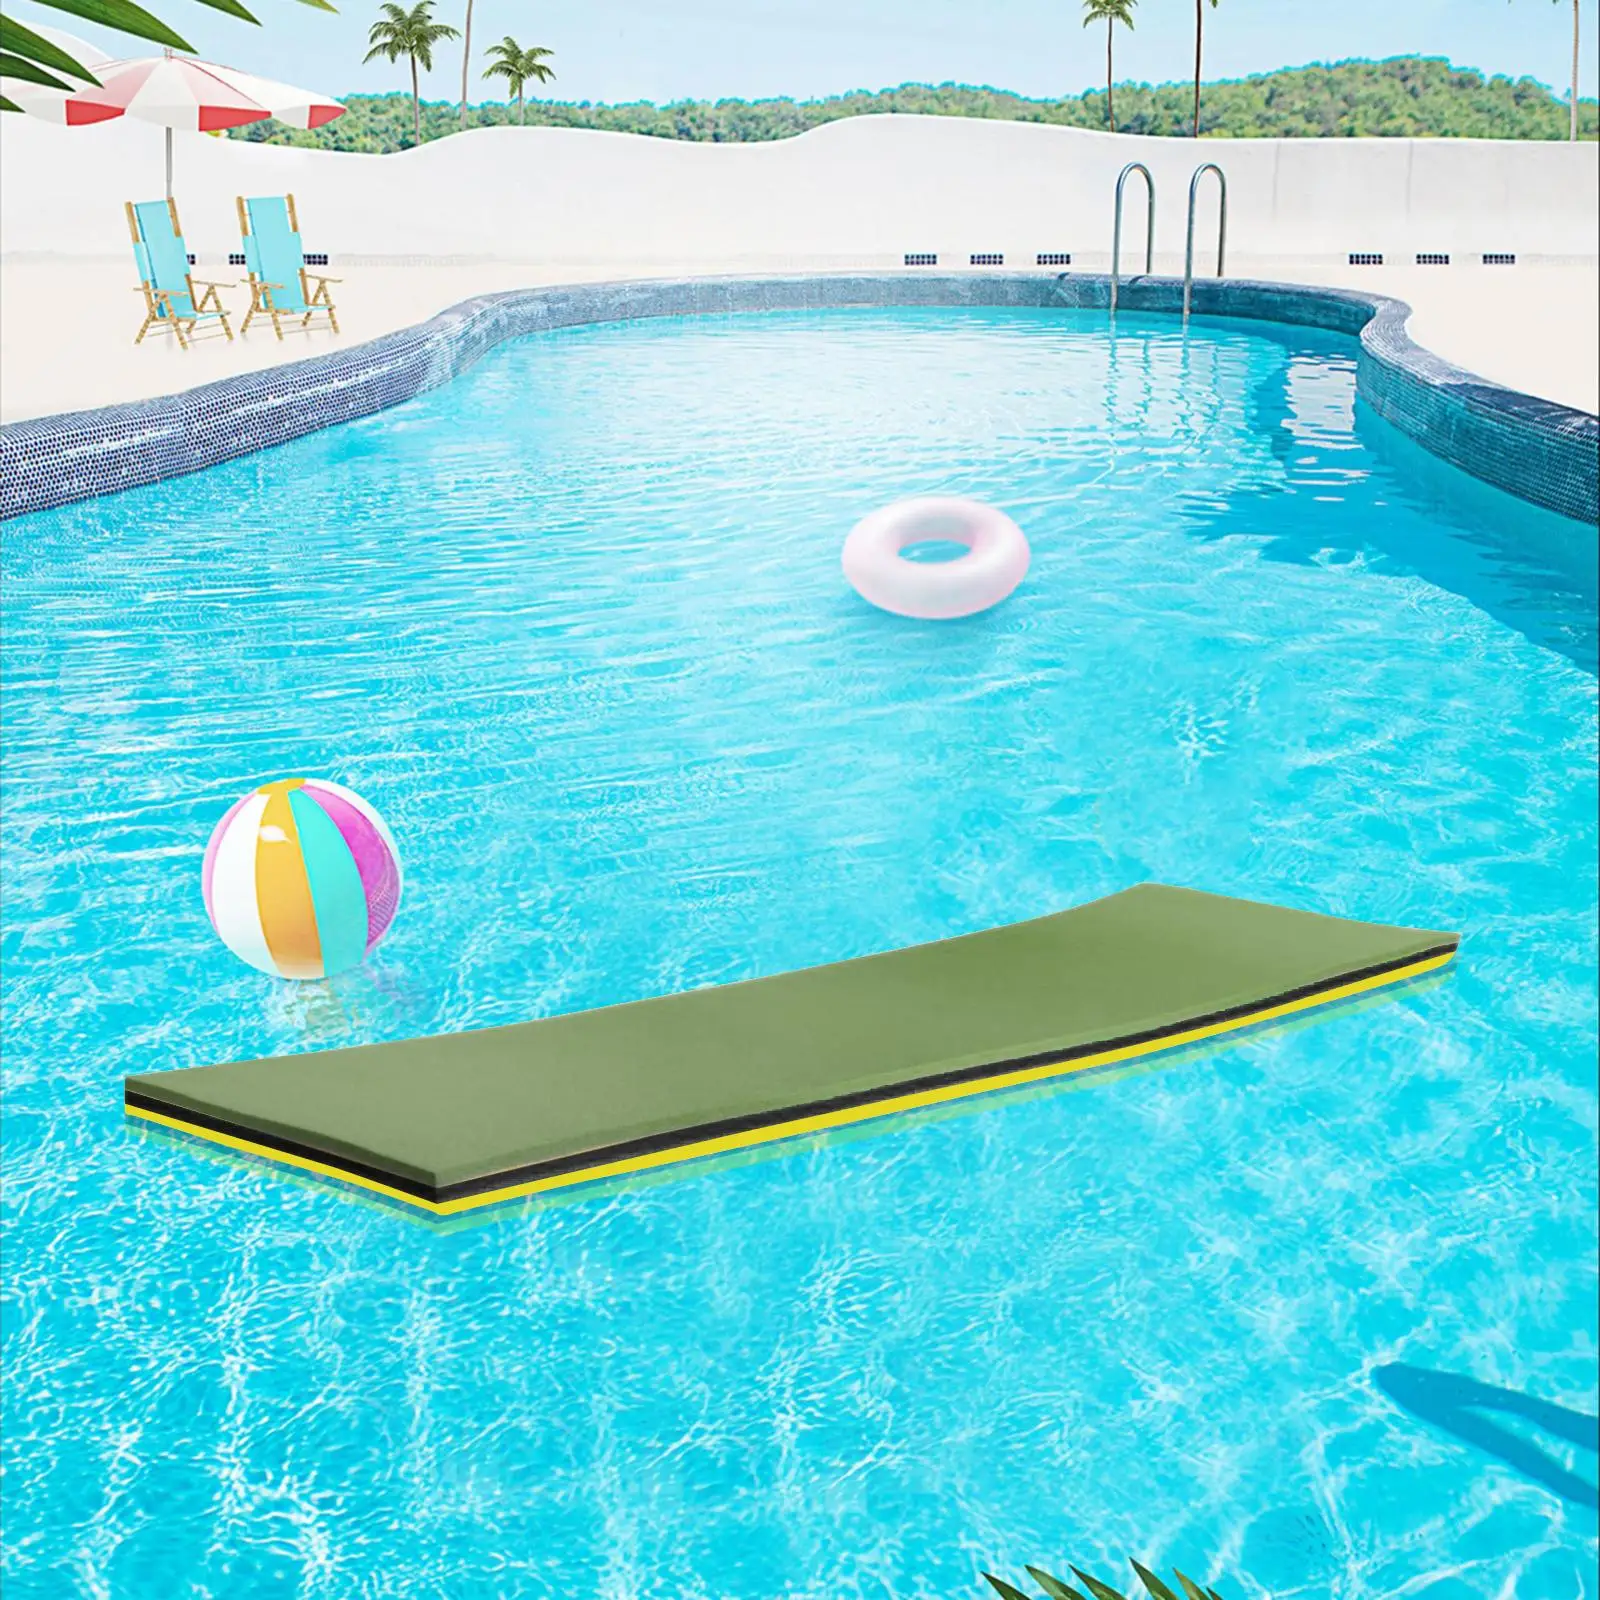 Pool Floating Water Mat Water Raft 43x15.7x1.3inch Lightweight for Kids, Teens Portable Roll up Pad Yellow Black Green